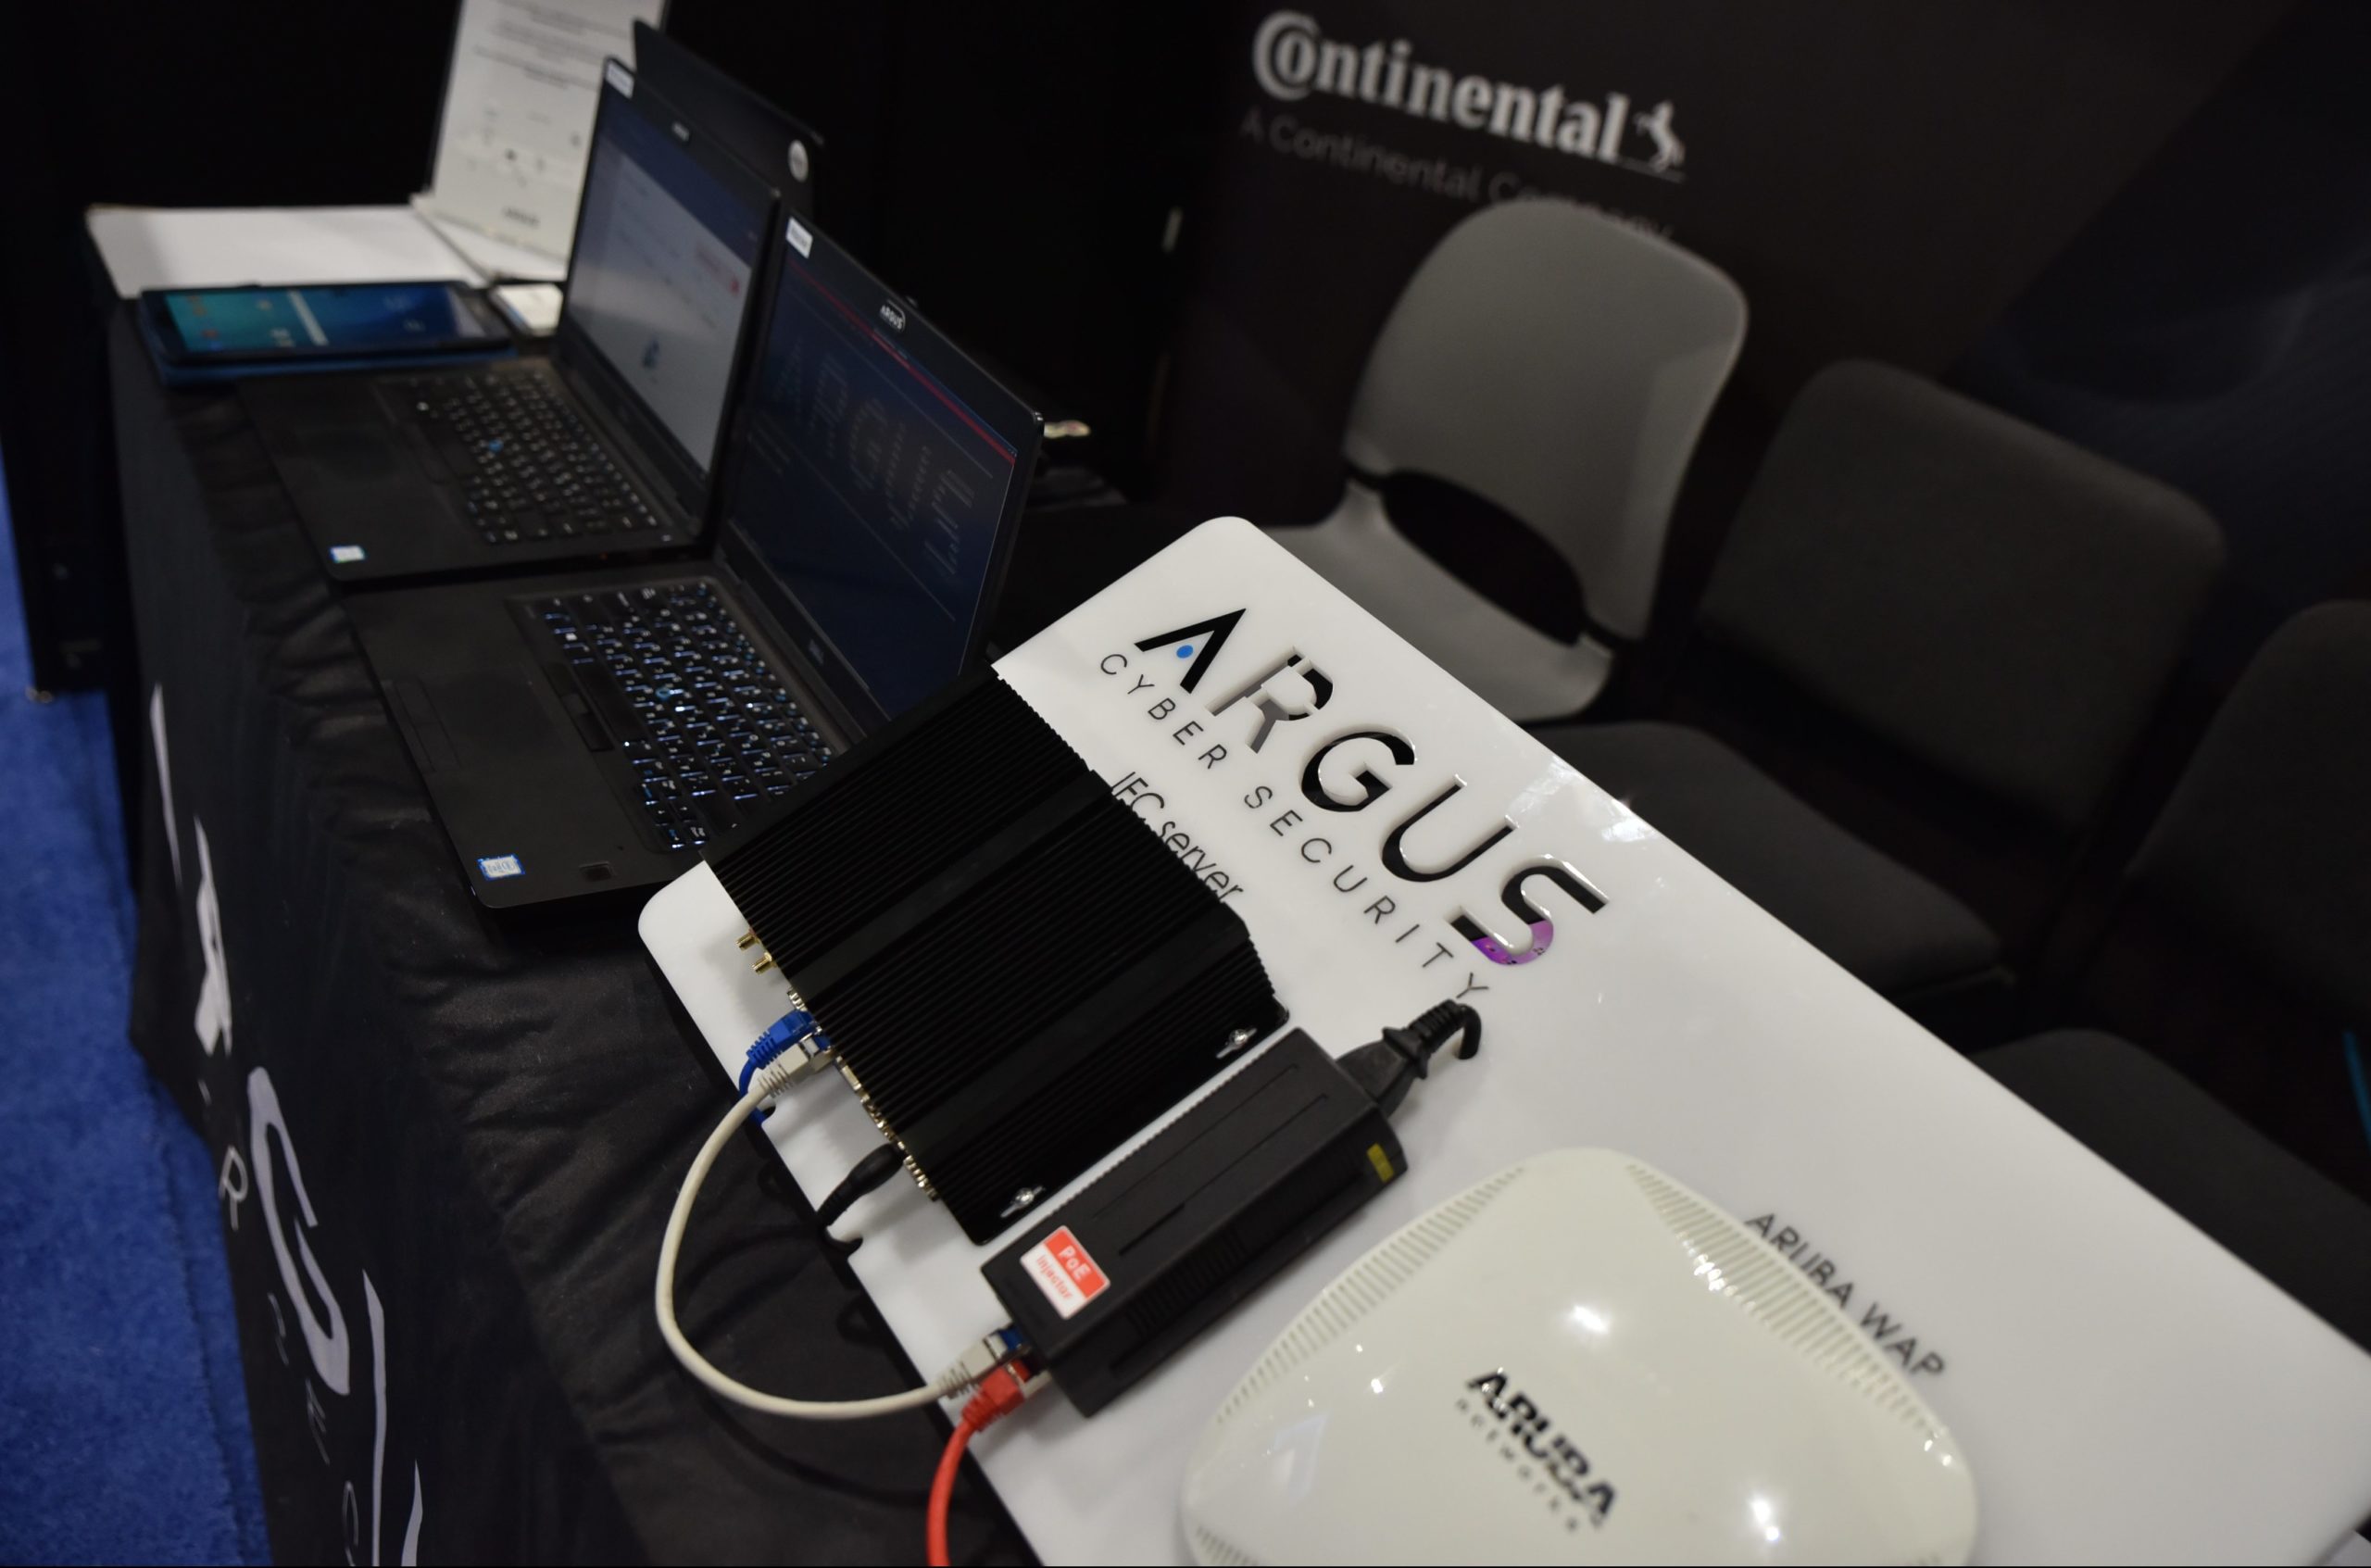 Argus Cyber Security's Argus IFEC Protection solution was showcased at APEX EXPO 2019